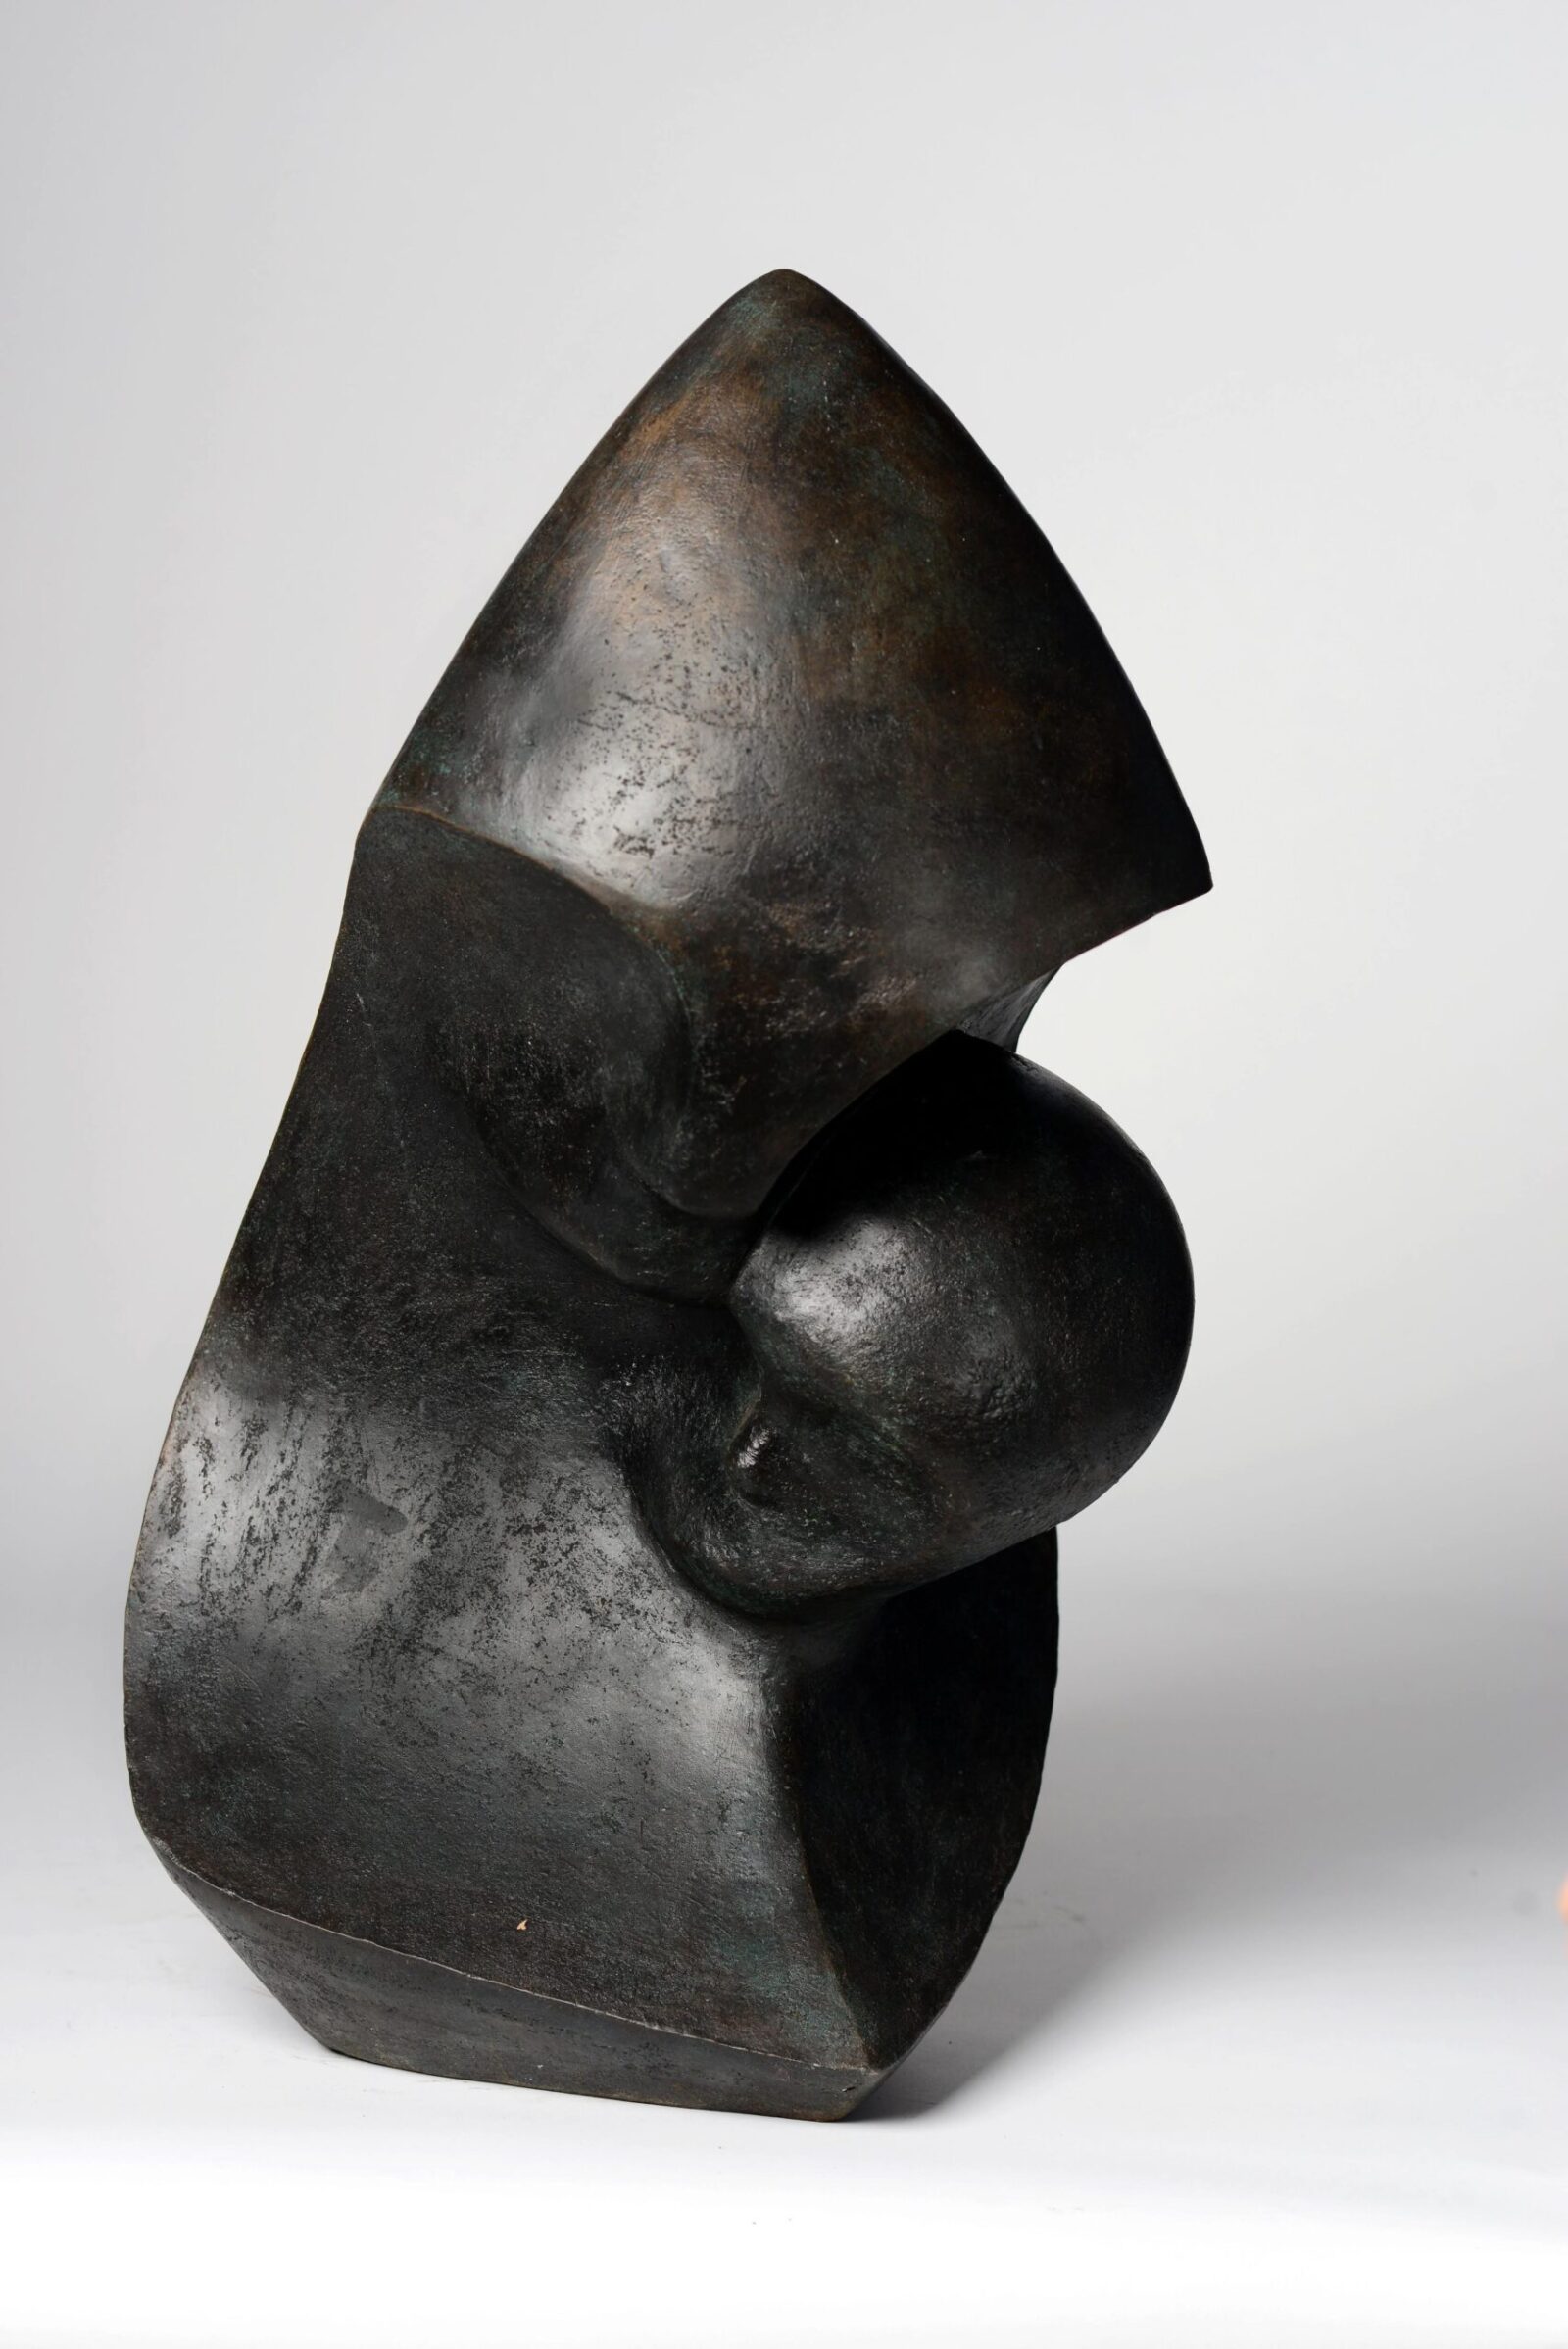 contemporary bronze sculpture of a double head based on Picasso